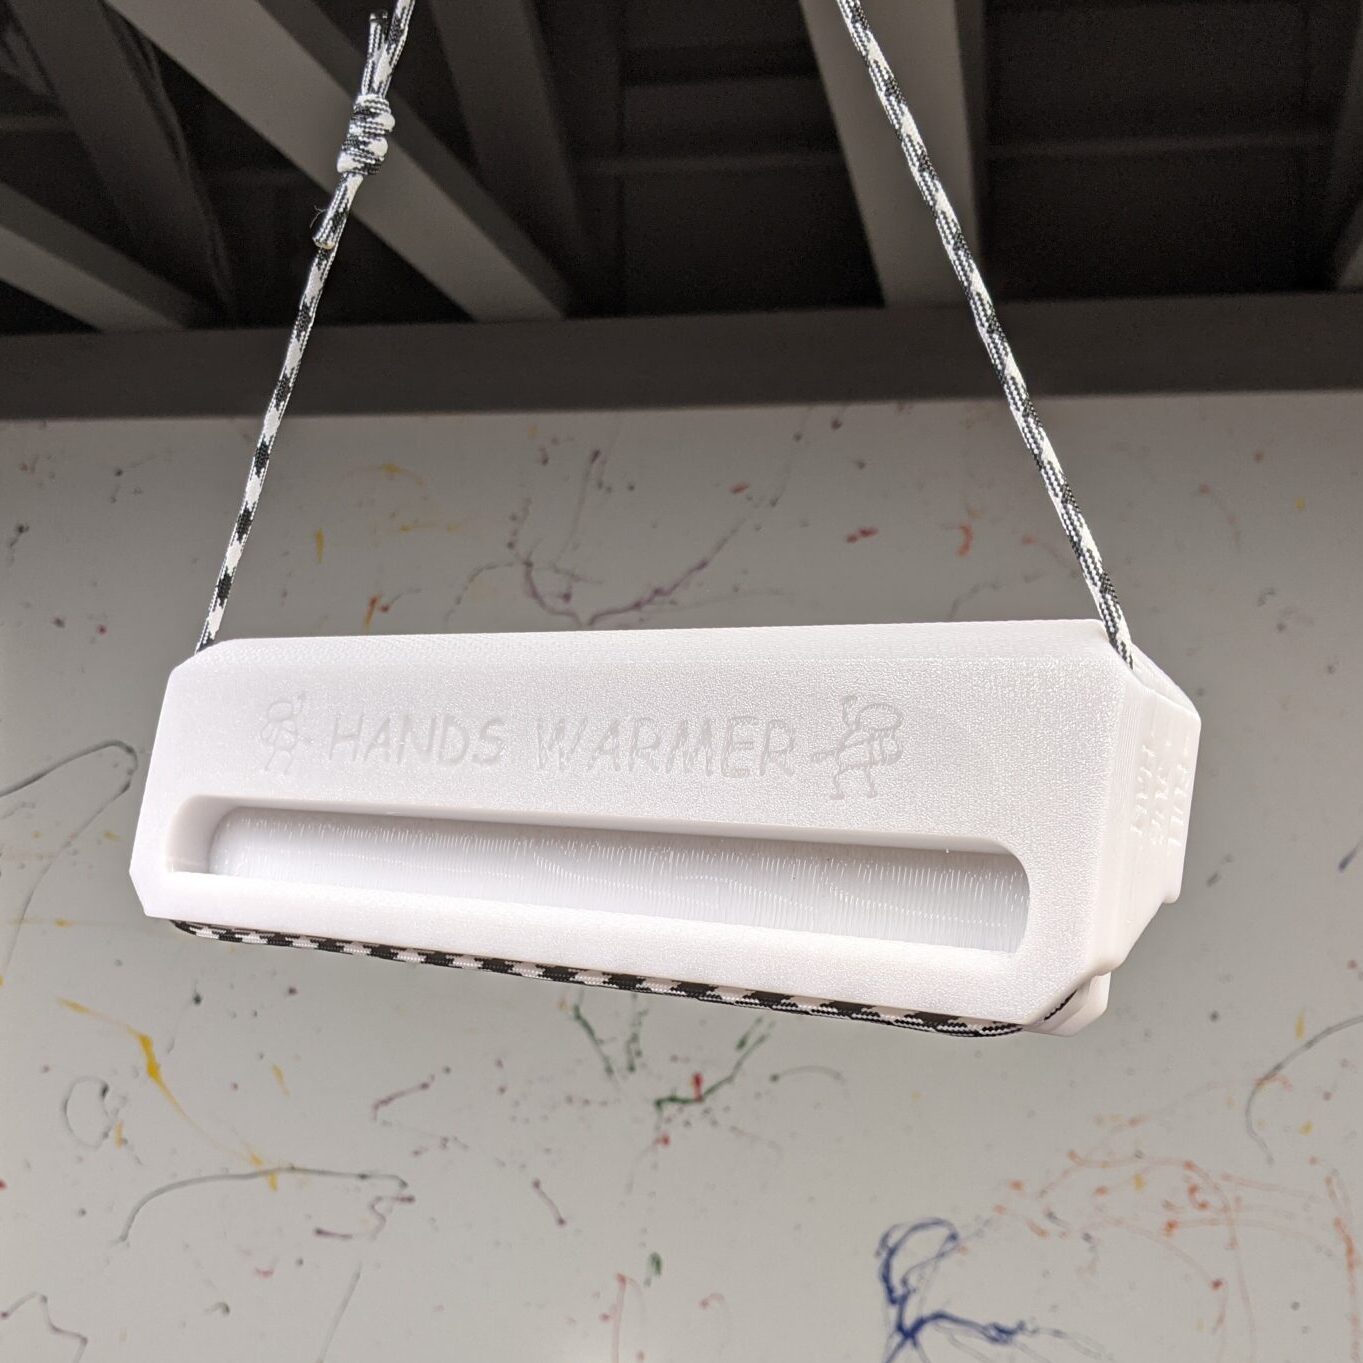 Hands Warmer – A Recycled Portable Hangboard